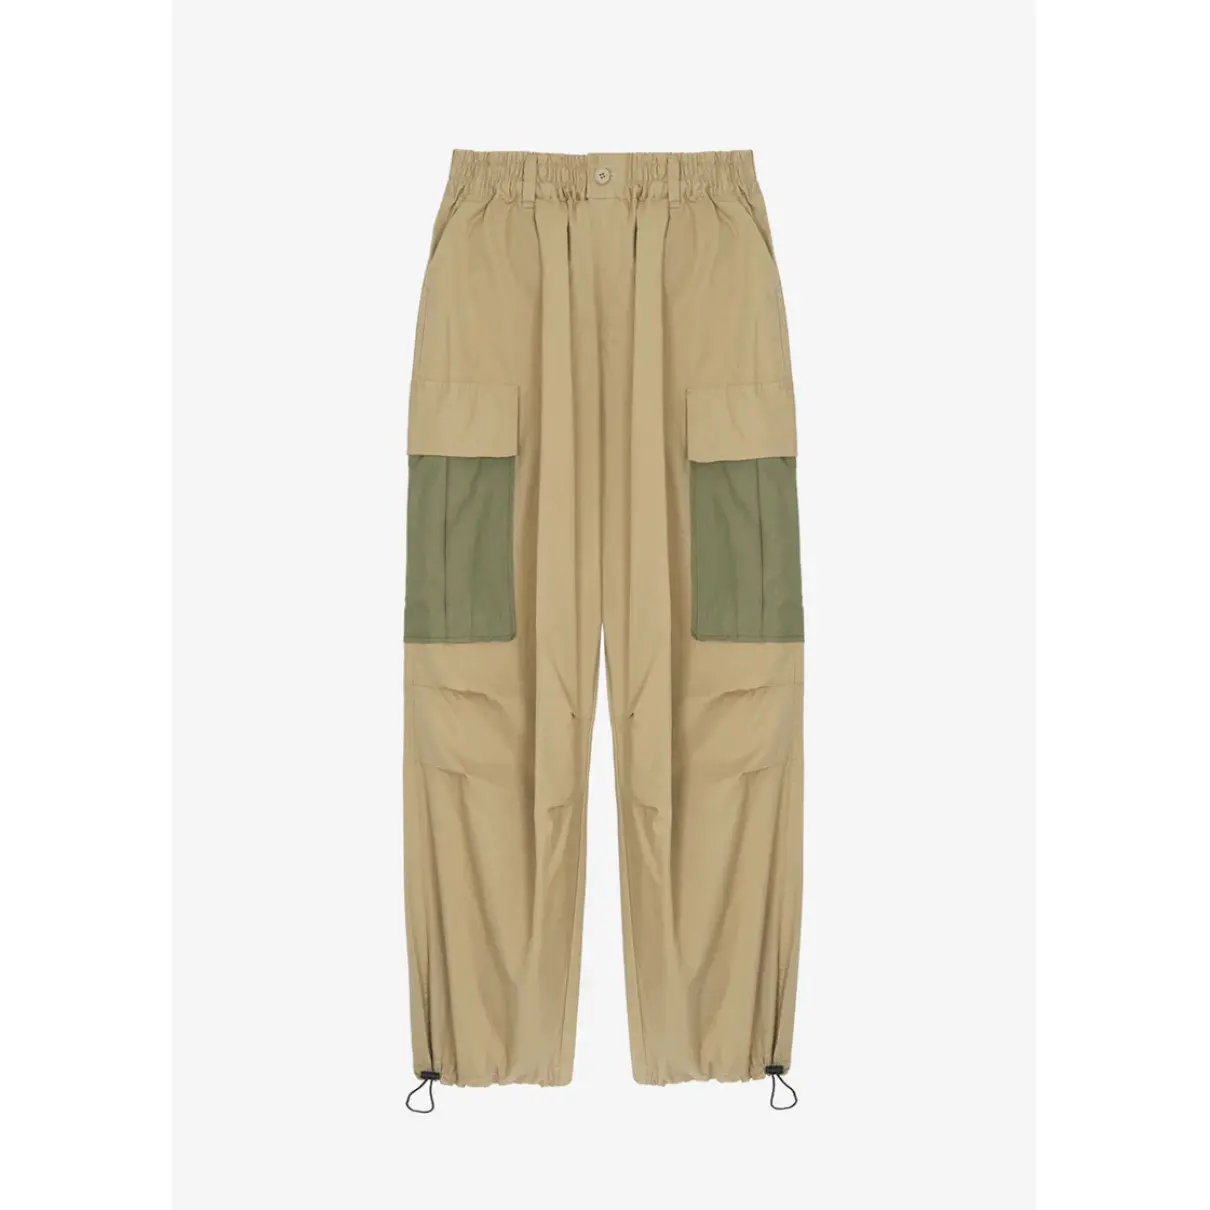 Buy The Frankie Shop Trousers online